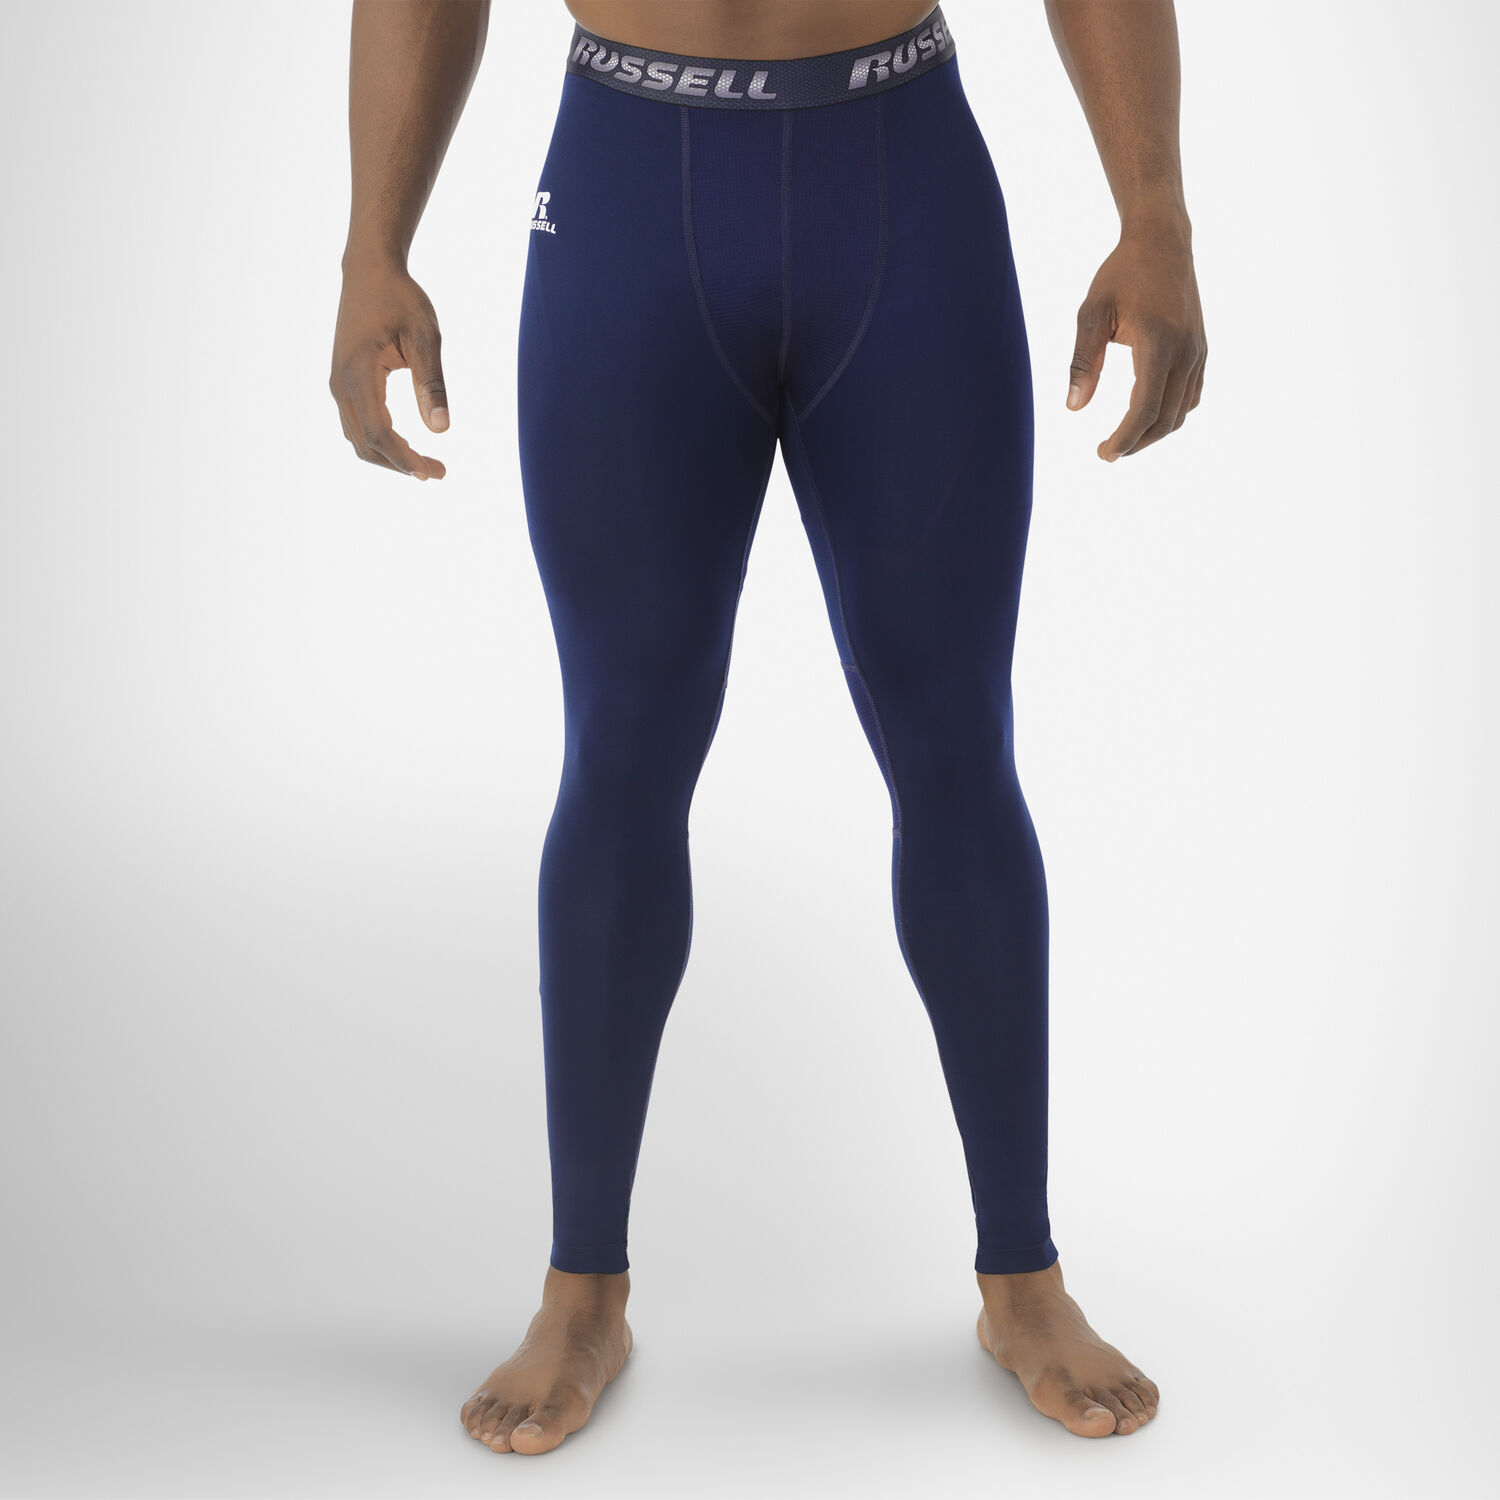 Russell Athletic Black Active Pants, Tights & Leggings